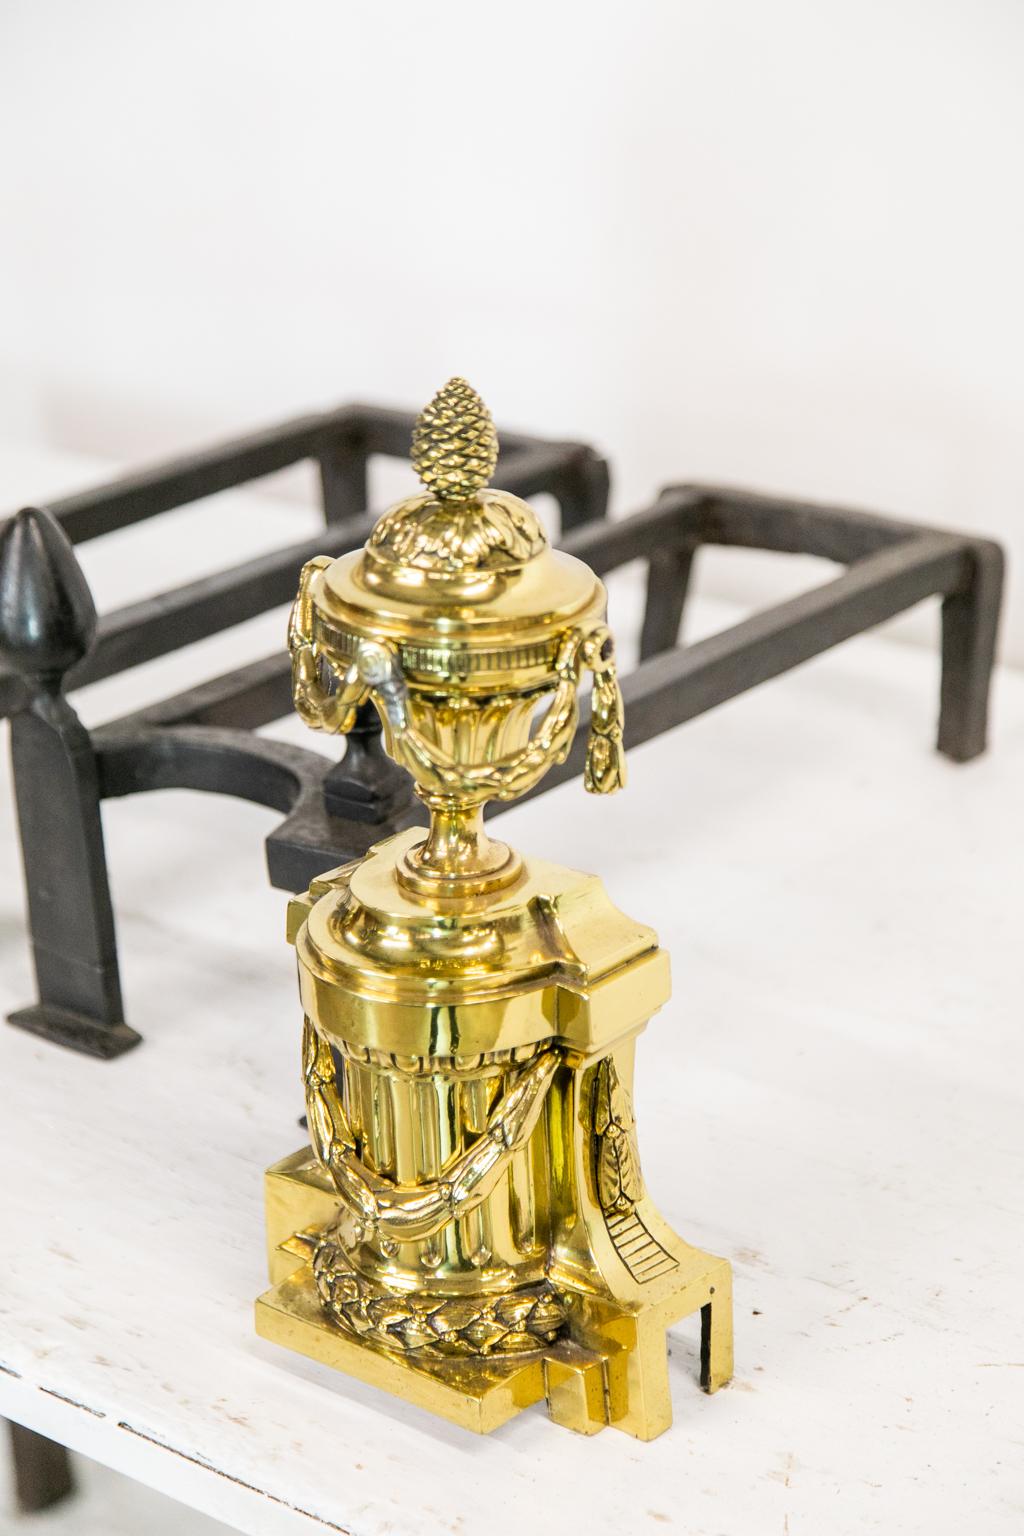 These andirons have neoclassical urns with floral swags on a straight plinth base. There are double steel supports with acorn finials. Each is signed: 